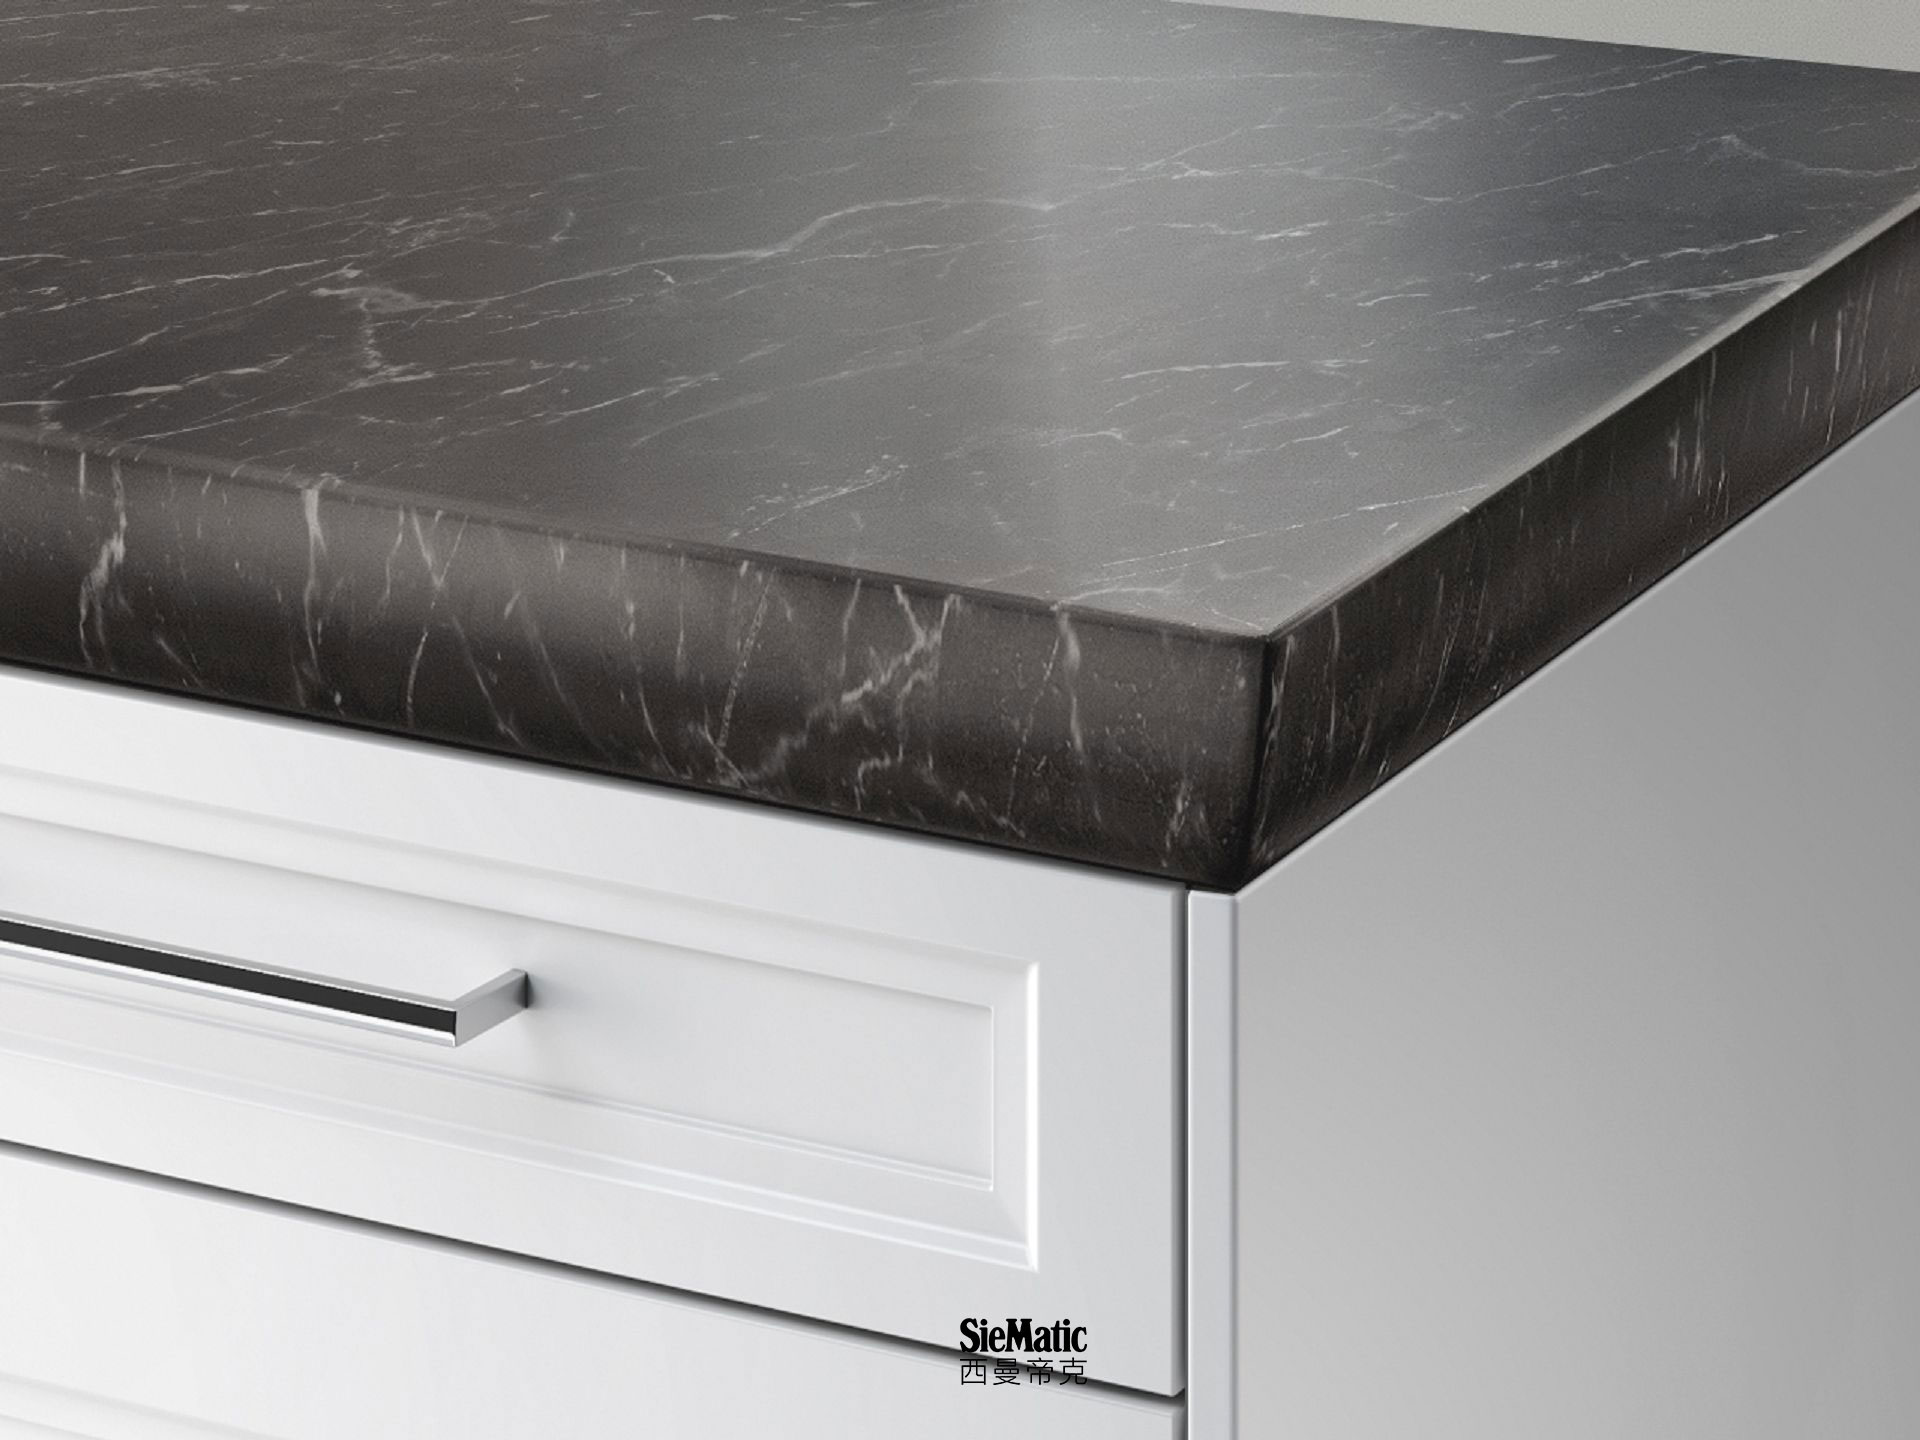 SieMatic StoneDesign kitchen countertop with elliptical edge